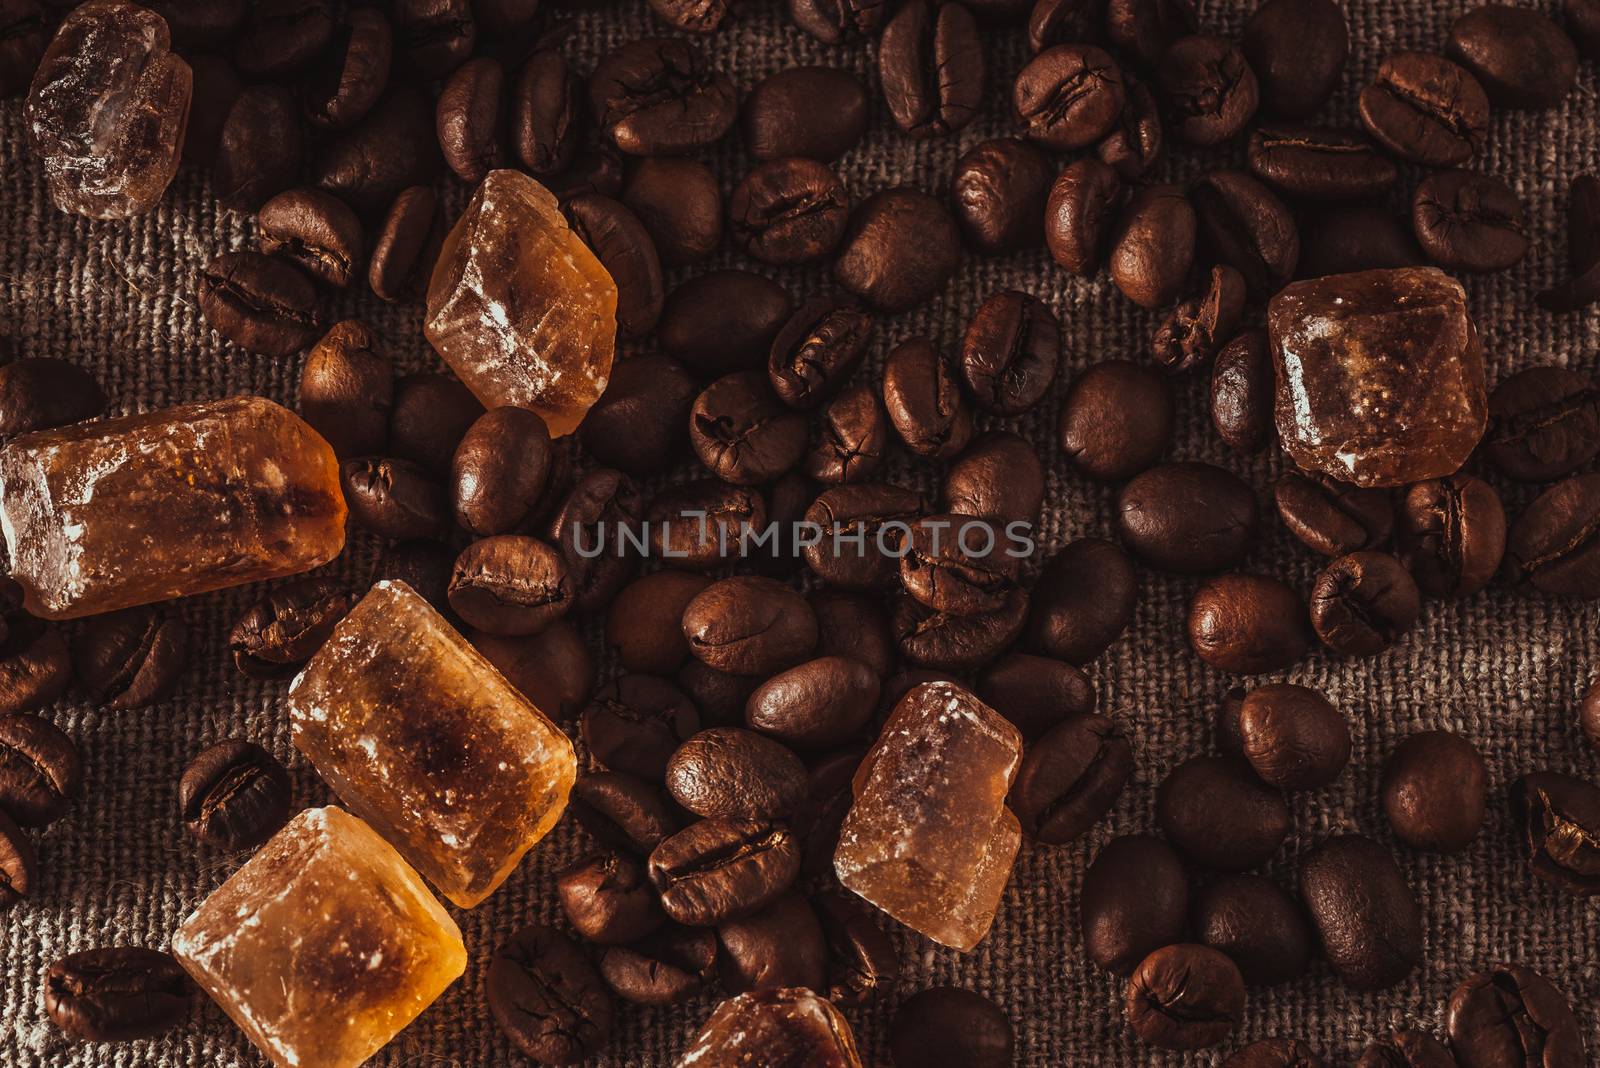 scattering of coffee beans and sugar by Seva_blsv